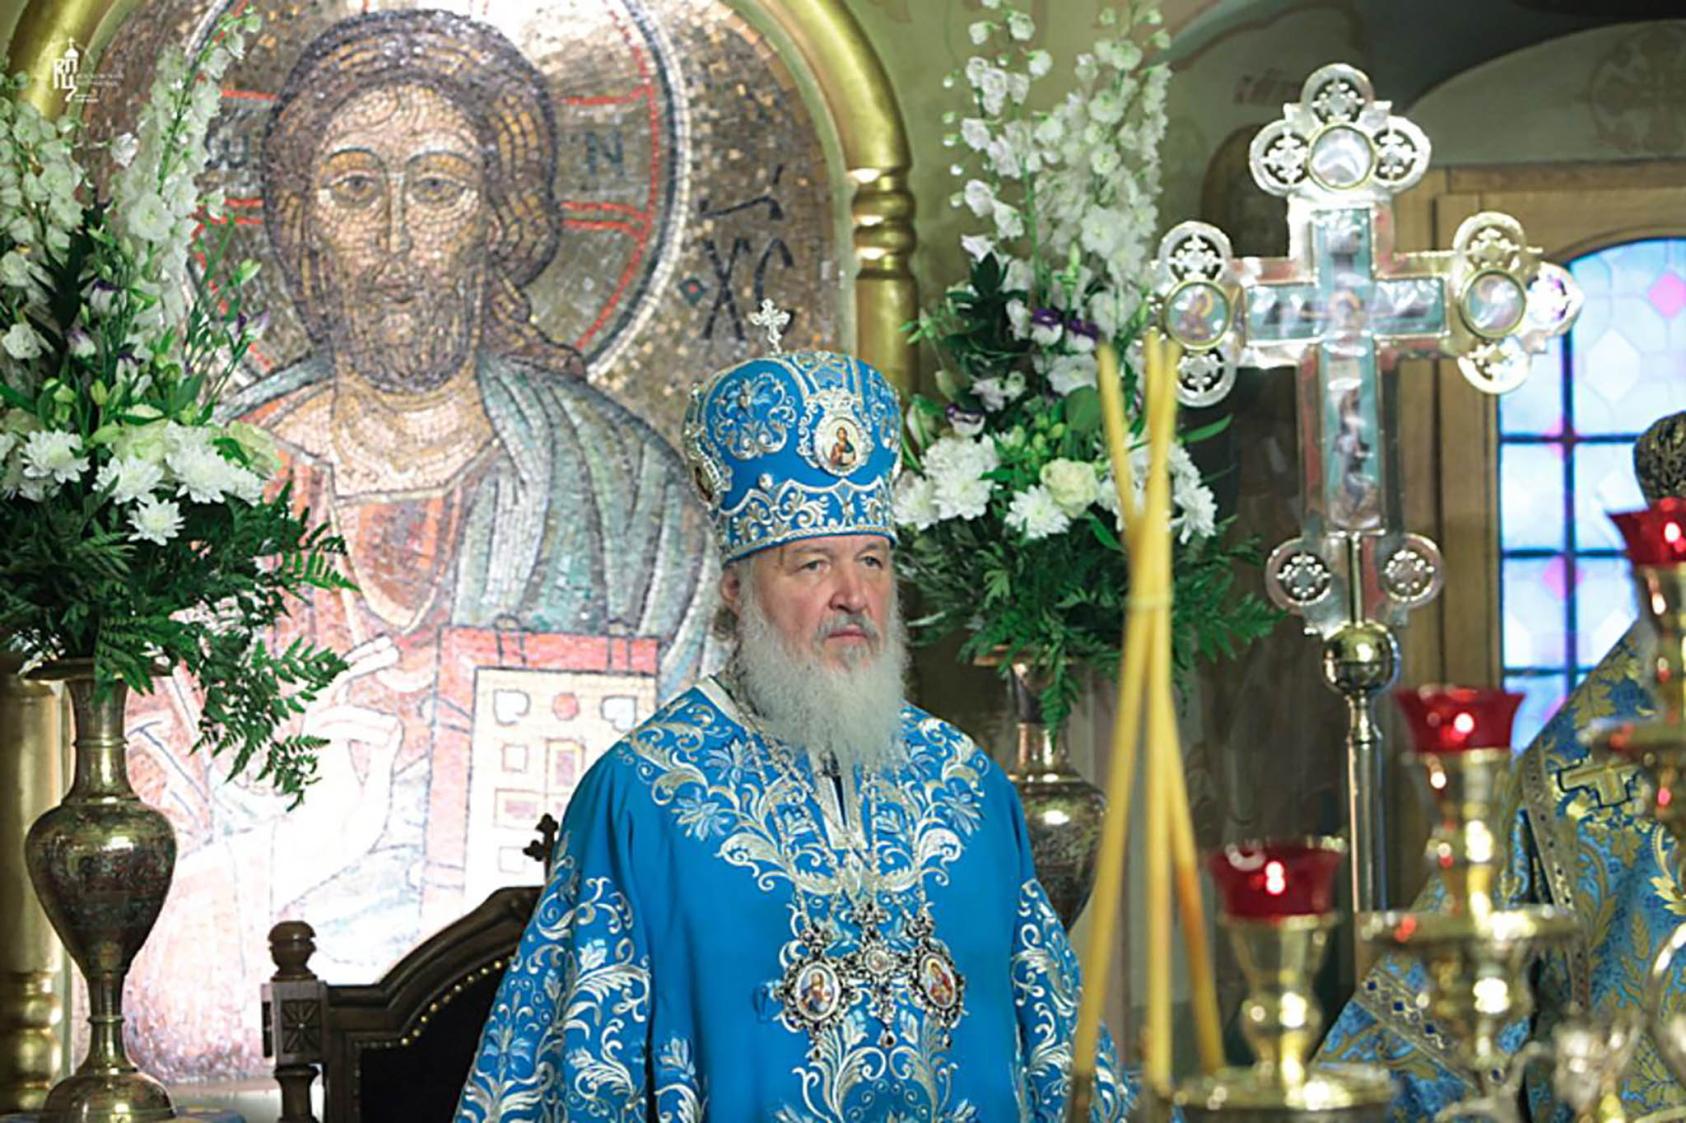 The Russian Orthodox Church’s leader, Patriarch Kirill, backs President Vladimir Putin’s invasion of Ukraine as a “holy war” and is expanding his church in Africa as the Kremlin seeks influence there. (Larry Koester/CC License 2.0)